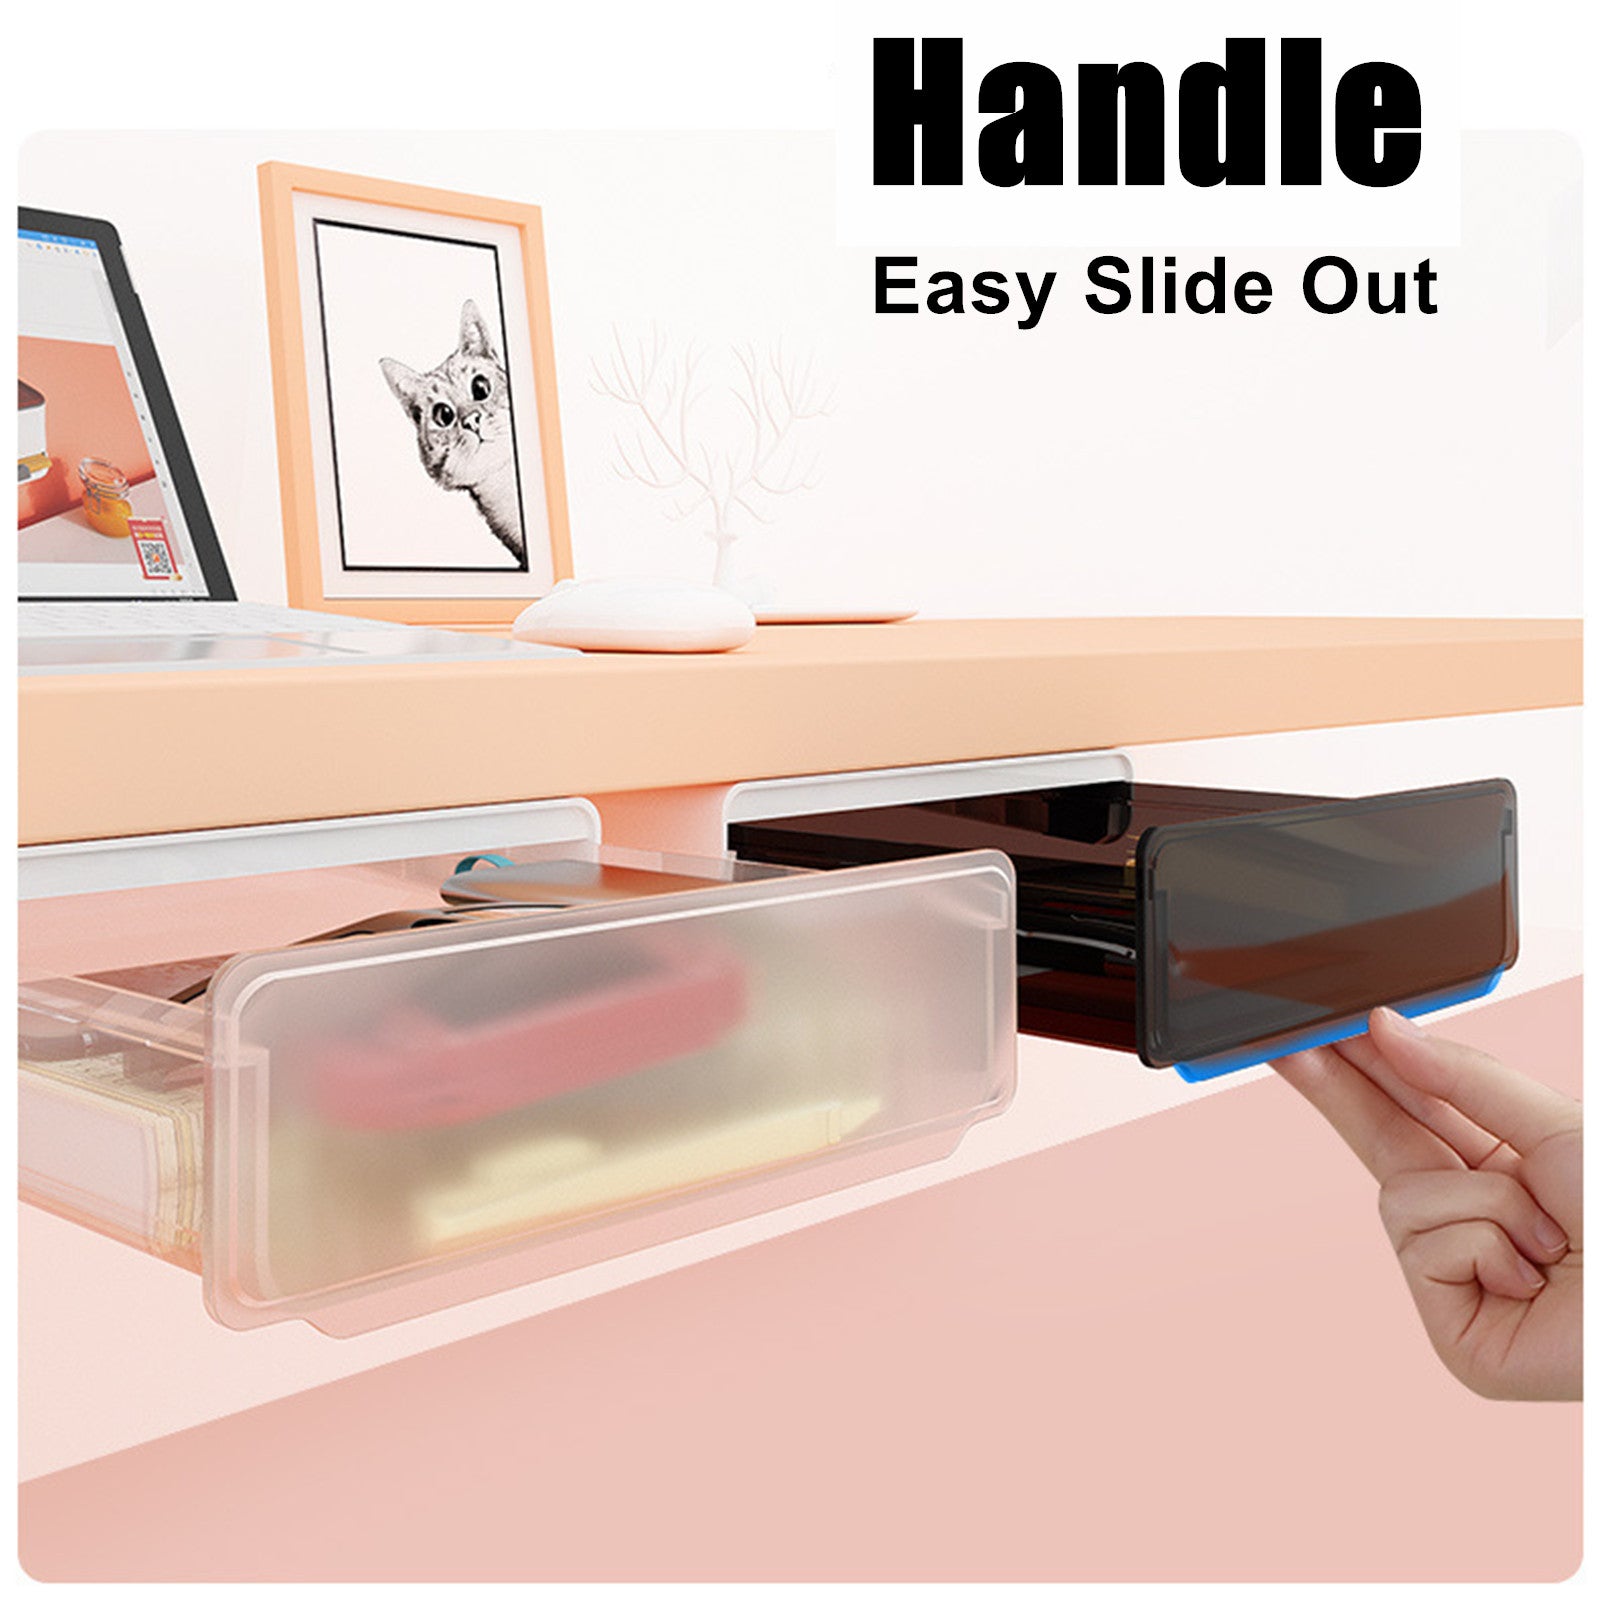 Under Desk Drawer Slide-out Large Office Organizers and Storage Drawers - Small Black from Deals499 at Deals499